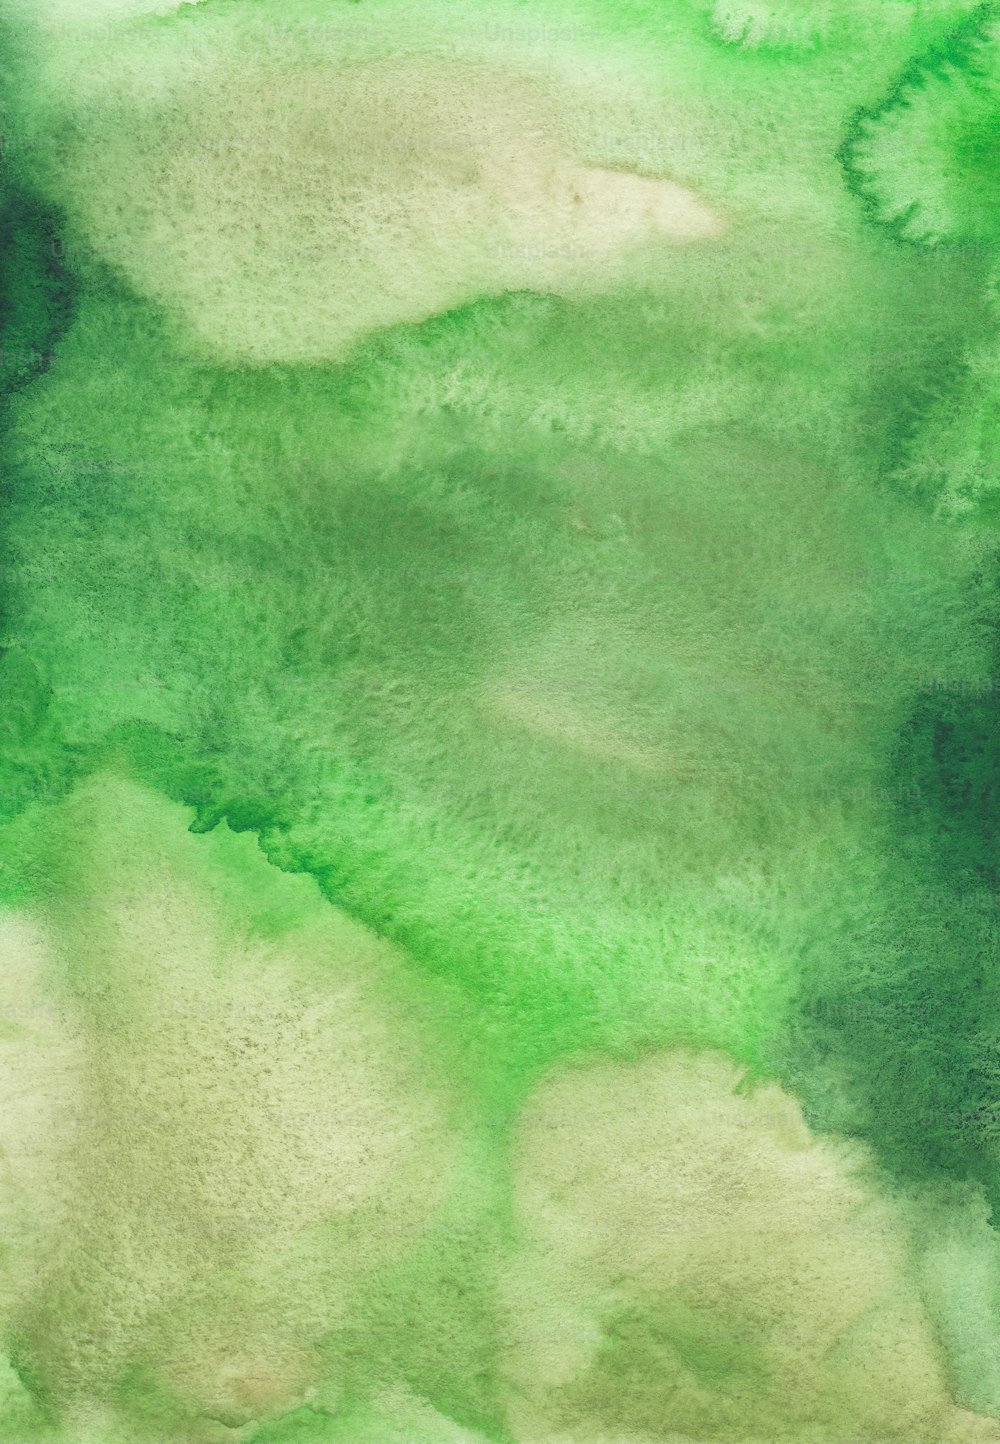 a watercolor painting of green and white clouds